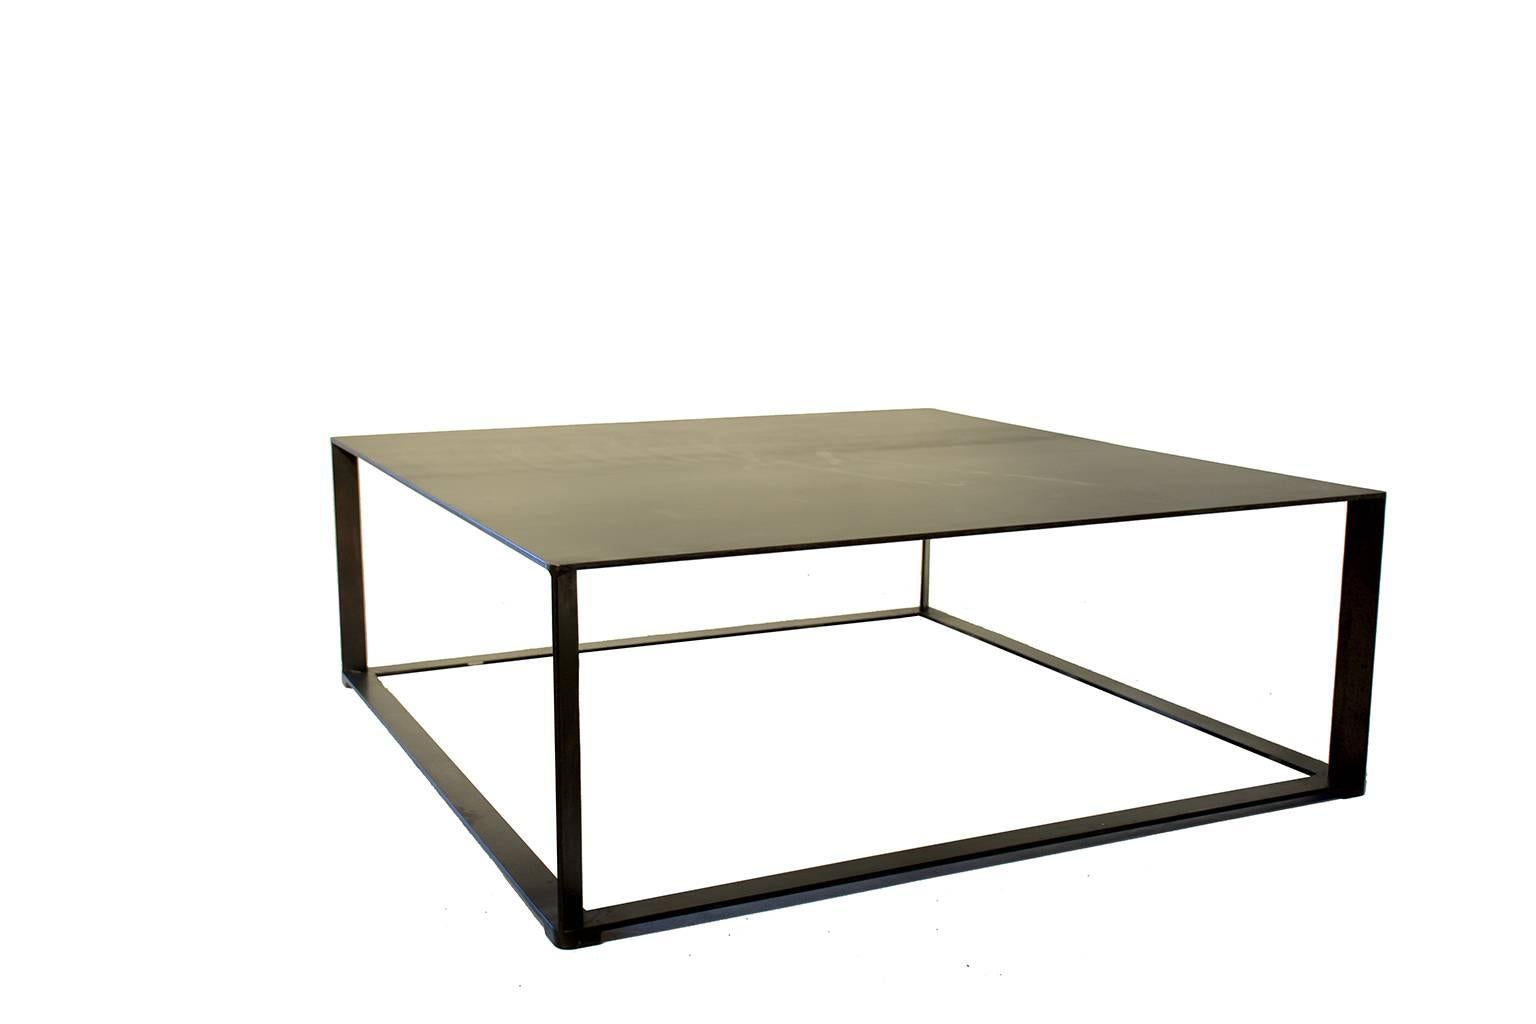 Modernist coffee table, steel in black patina.